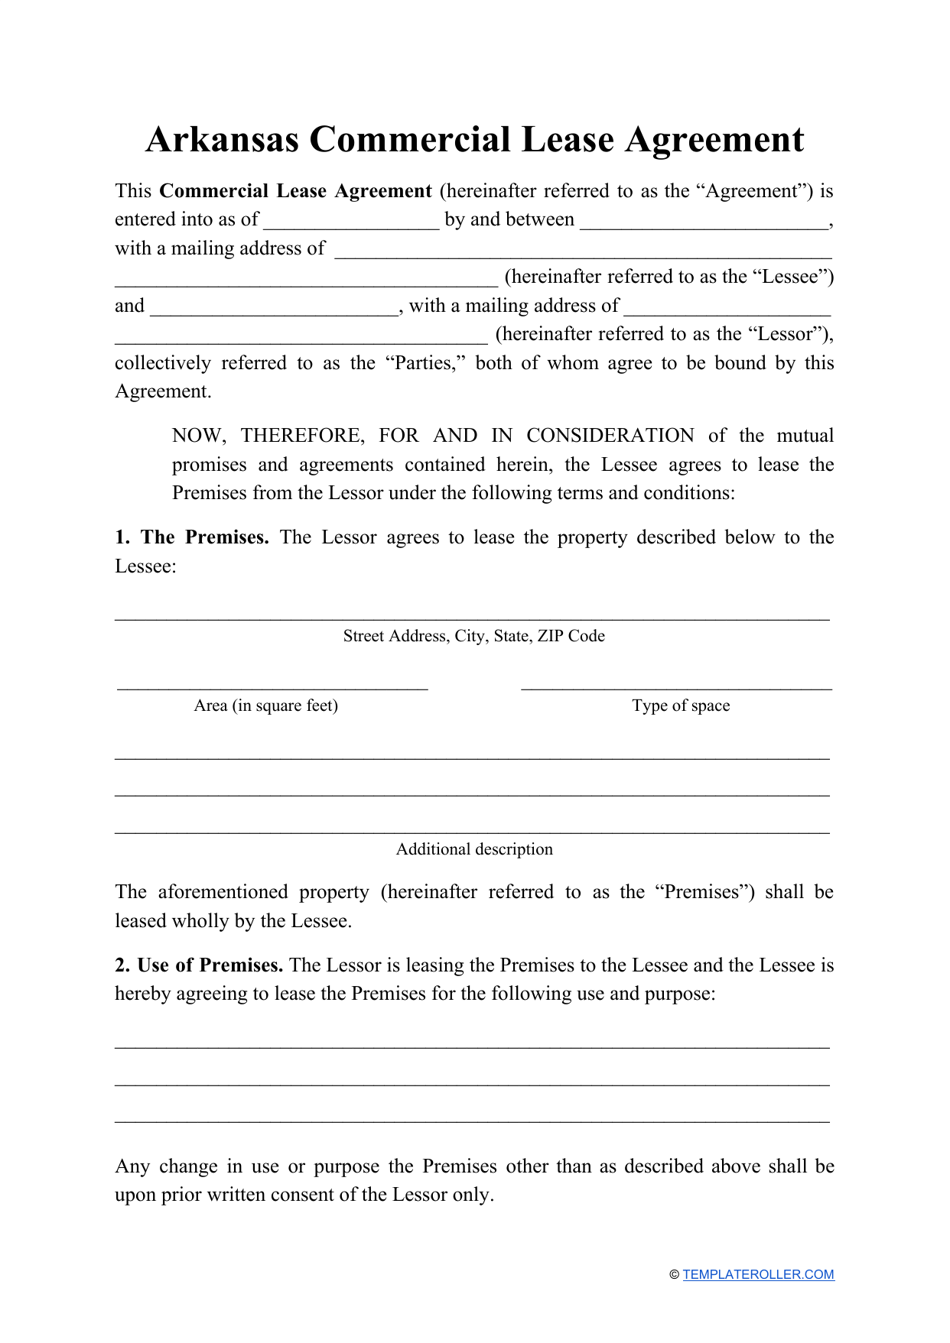 arkansas commercial lease agreement template download printable pdf templateroller